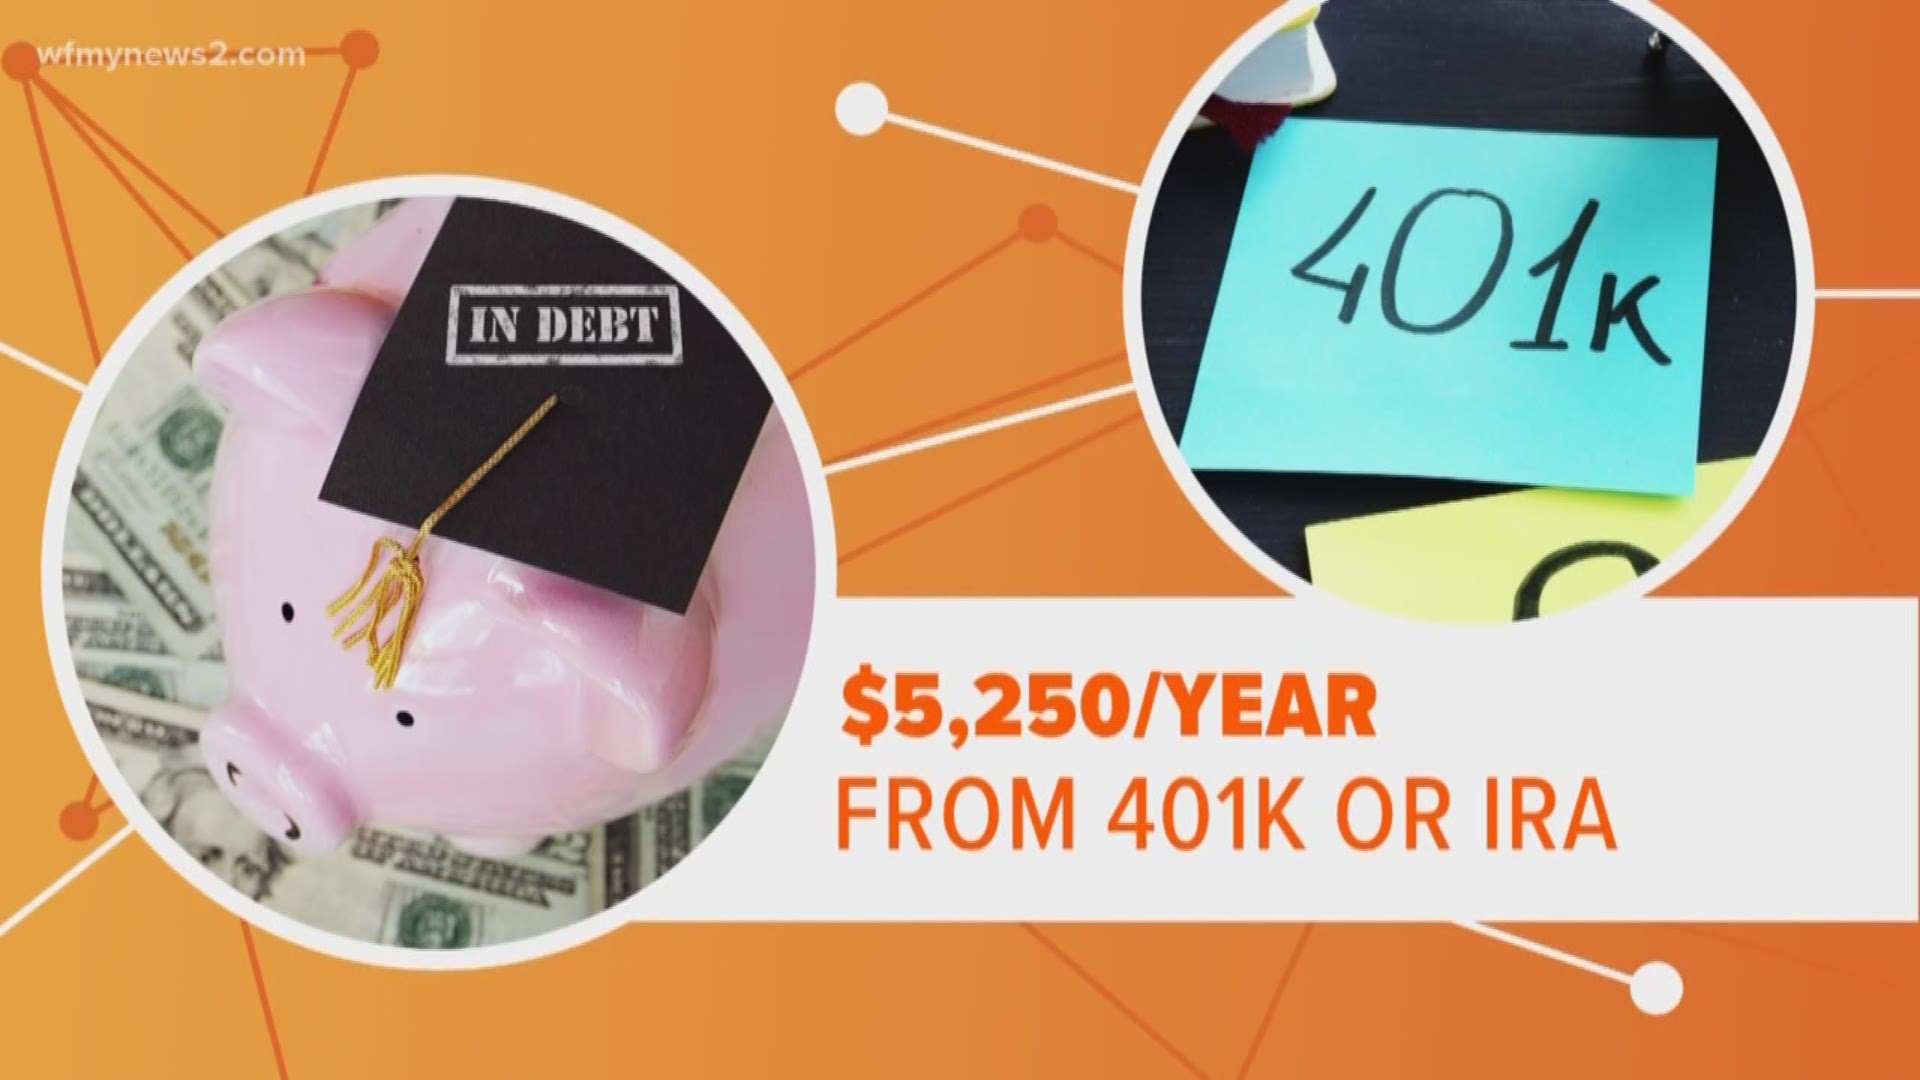 A new law could allow you to use funds from your 401K to pay off your student loan debt.